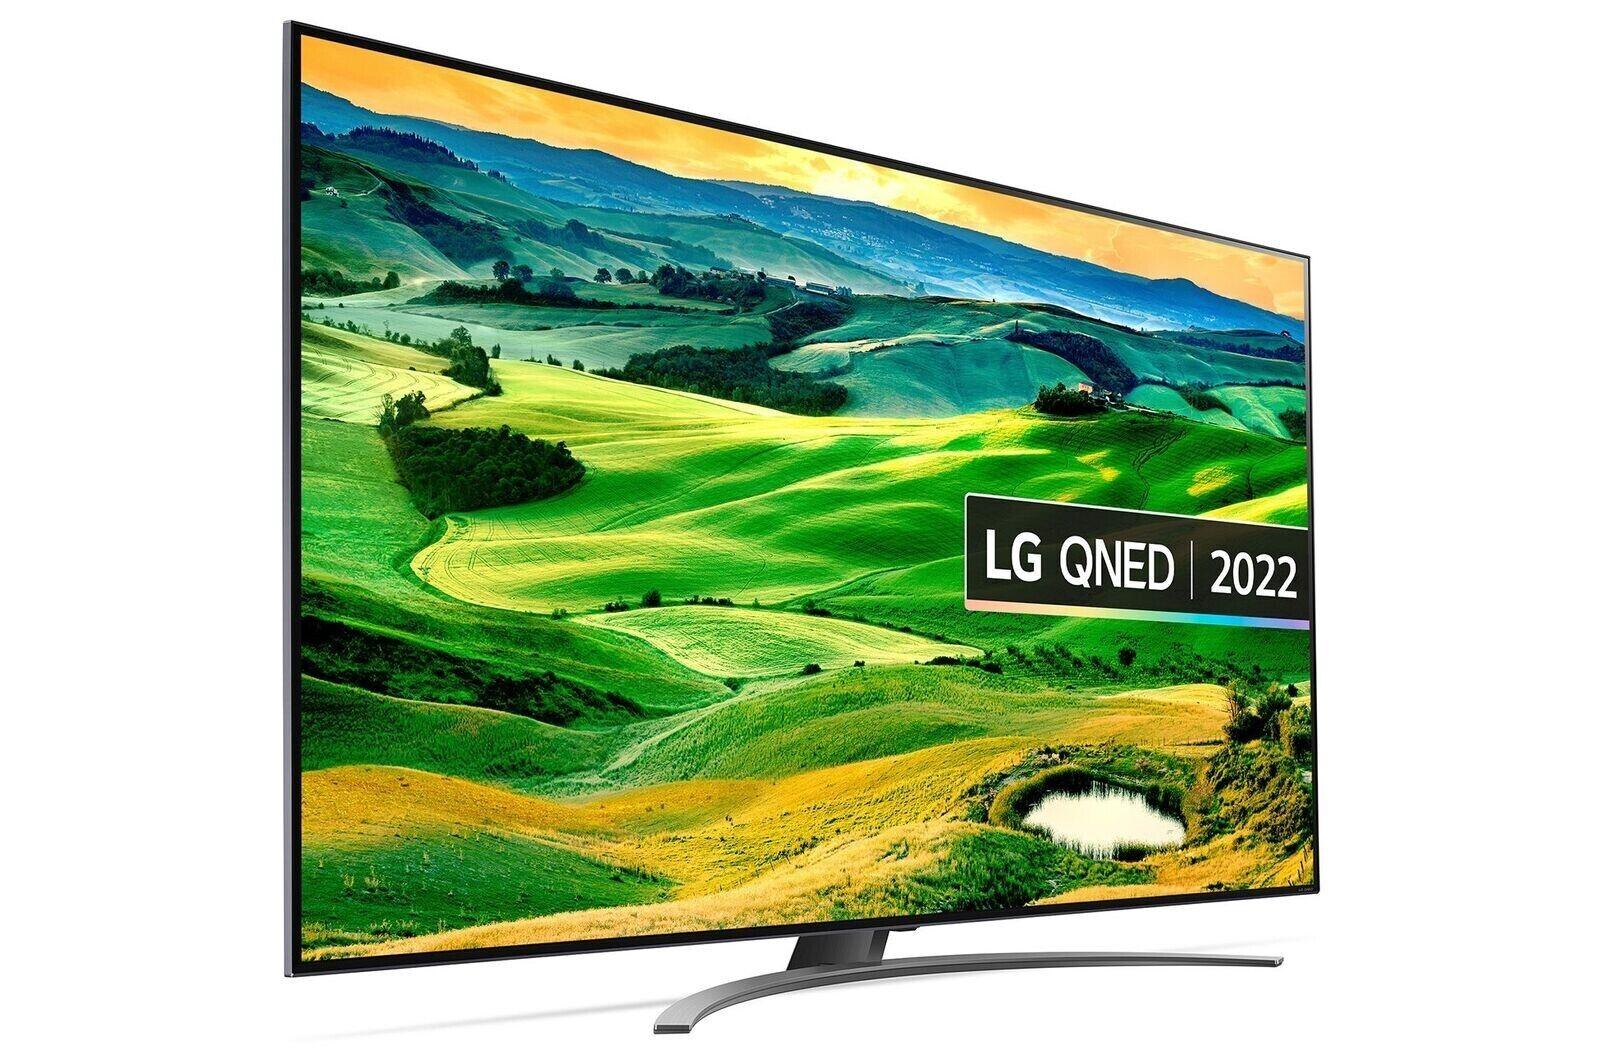 LG 75QNED816QA 75" QNED 4K HDR Smart TV COLLECTION ONLY NO STAND - Smart Clear Vision